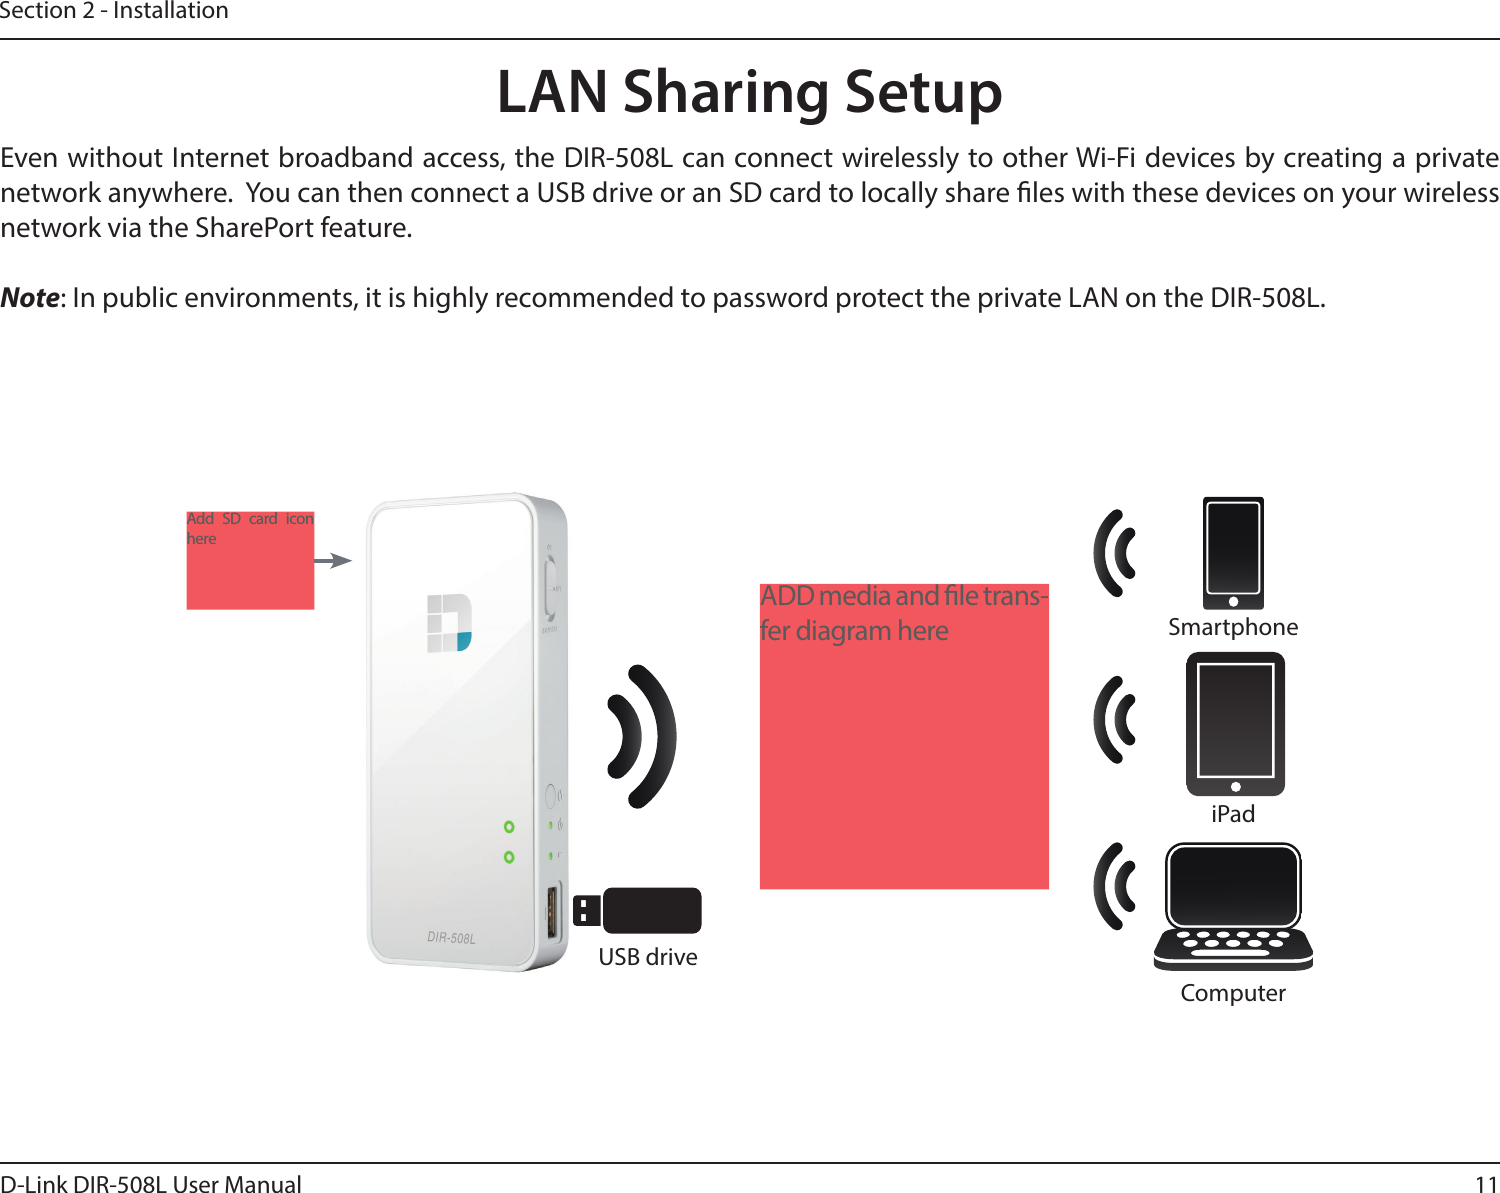 11D-Link DIR-508L User ManualSection 2 - InstallationLAN Sharing SetupEven without Internet broadband access, the DIR-508L can connect wirelessly to other Wi-Fi devices by creating a private network anywhere.  You can then connect a USB drive or an SD card to locally share les with these devices on your wireless network via the SharePort feature.  Note: In public environments, it is highly recommended to password protect the private LAN on the DIR-508L.ComputeriPadSmartphoneUSB driveADD media and le trans-fer diagram hereAdd SD card icon here